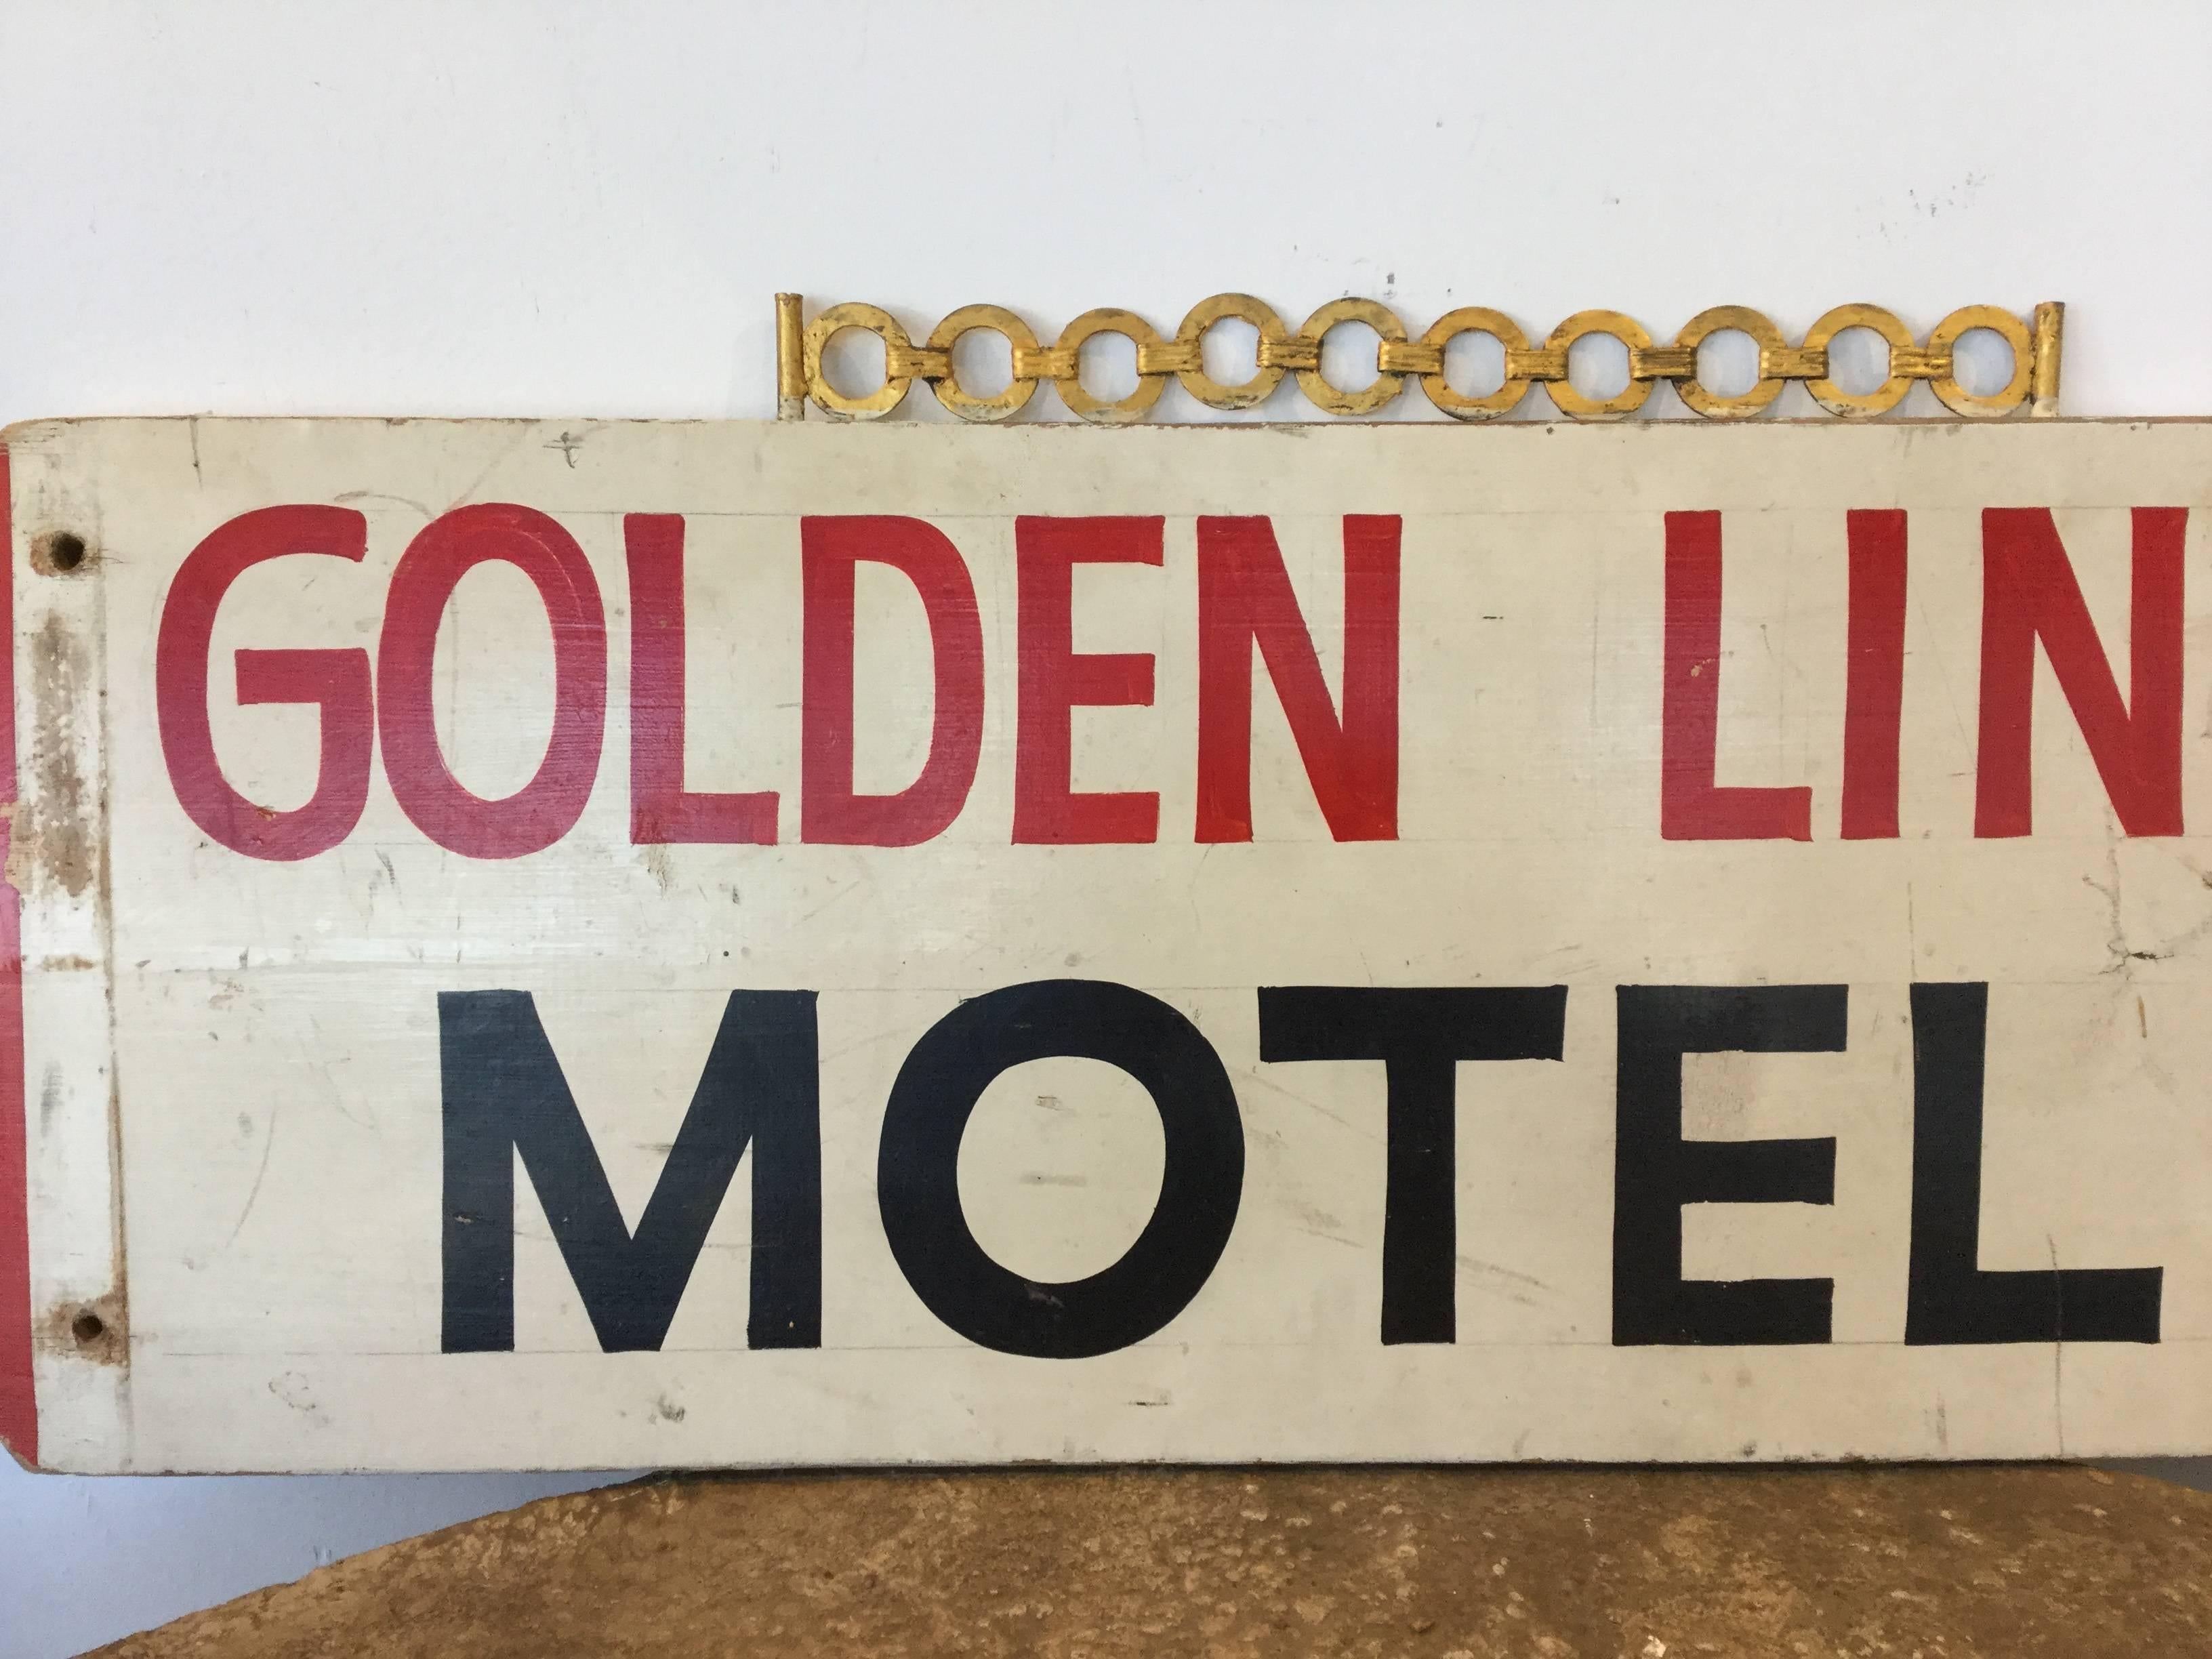 Great 1960s motel sign. Golden Link motel complete with gold painted links. Maybe building the lily here .. but life is short!